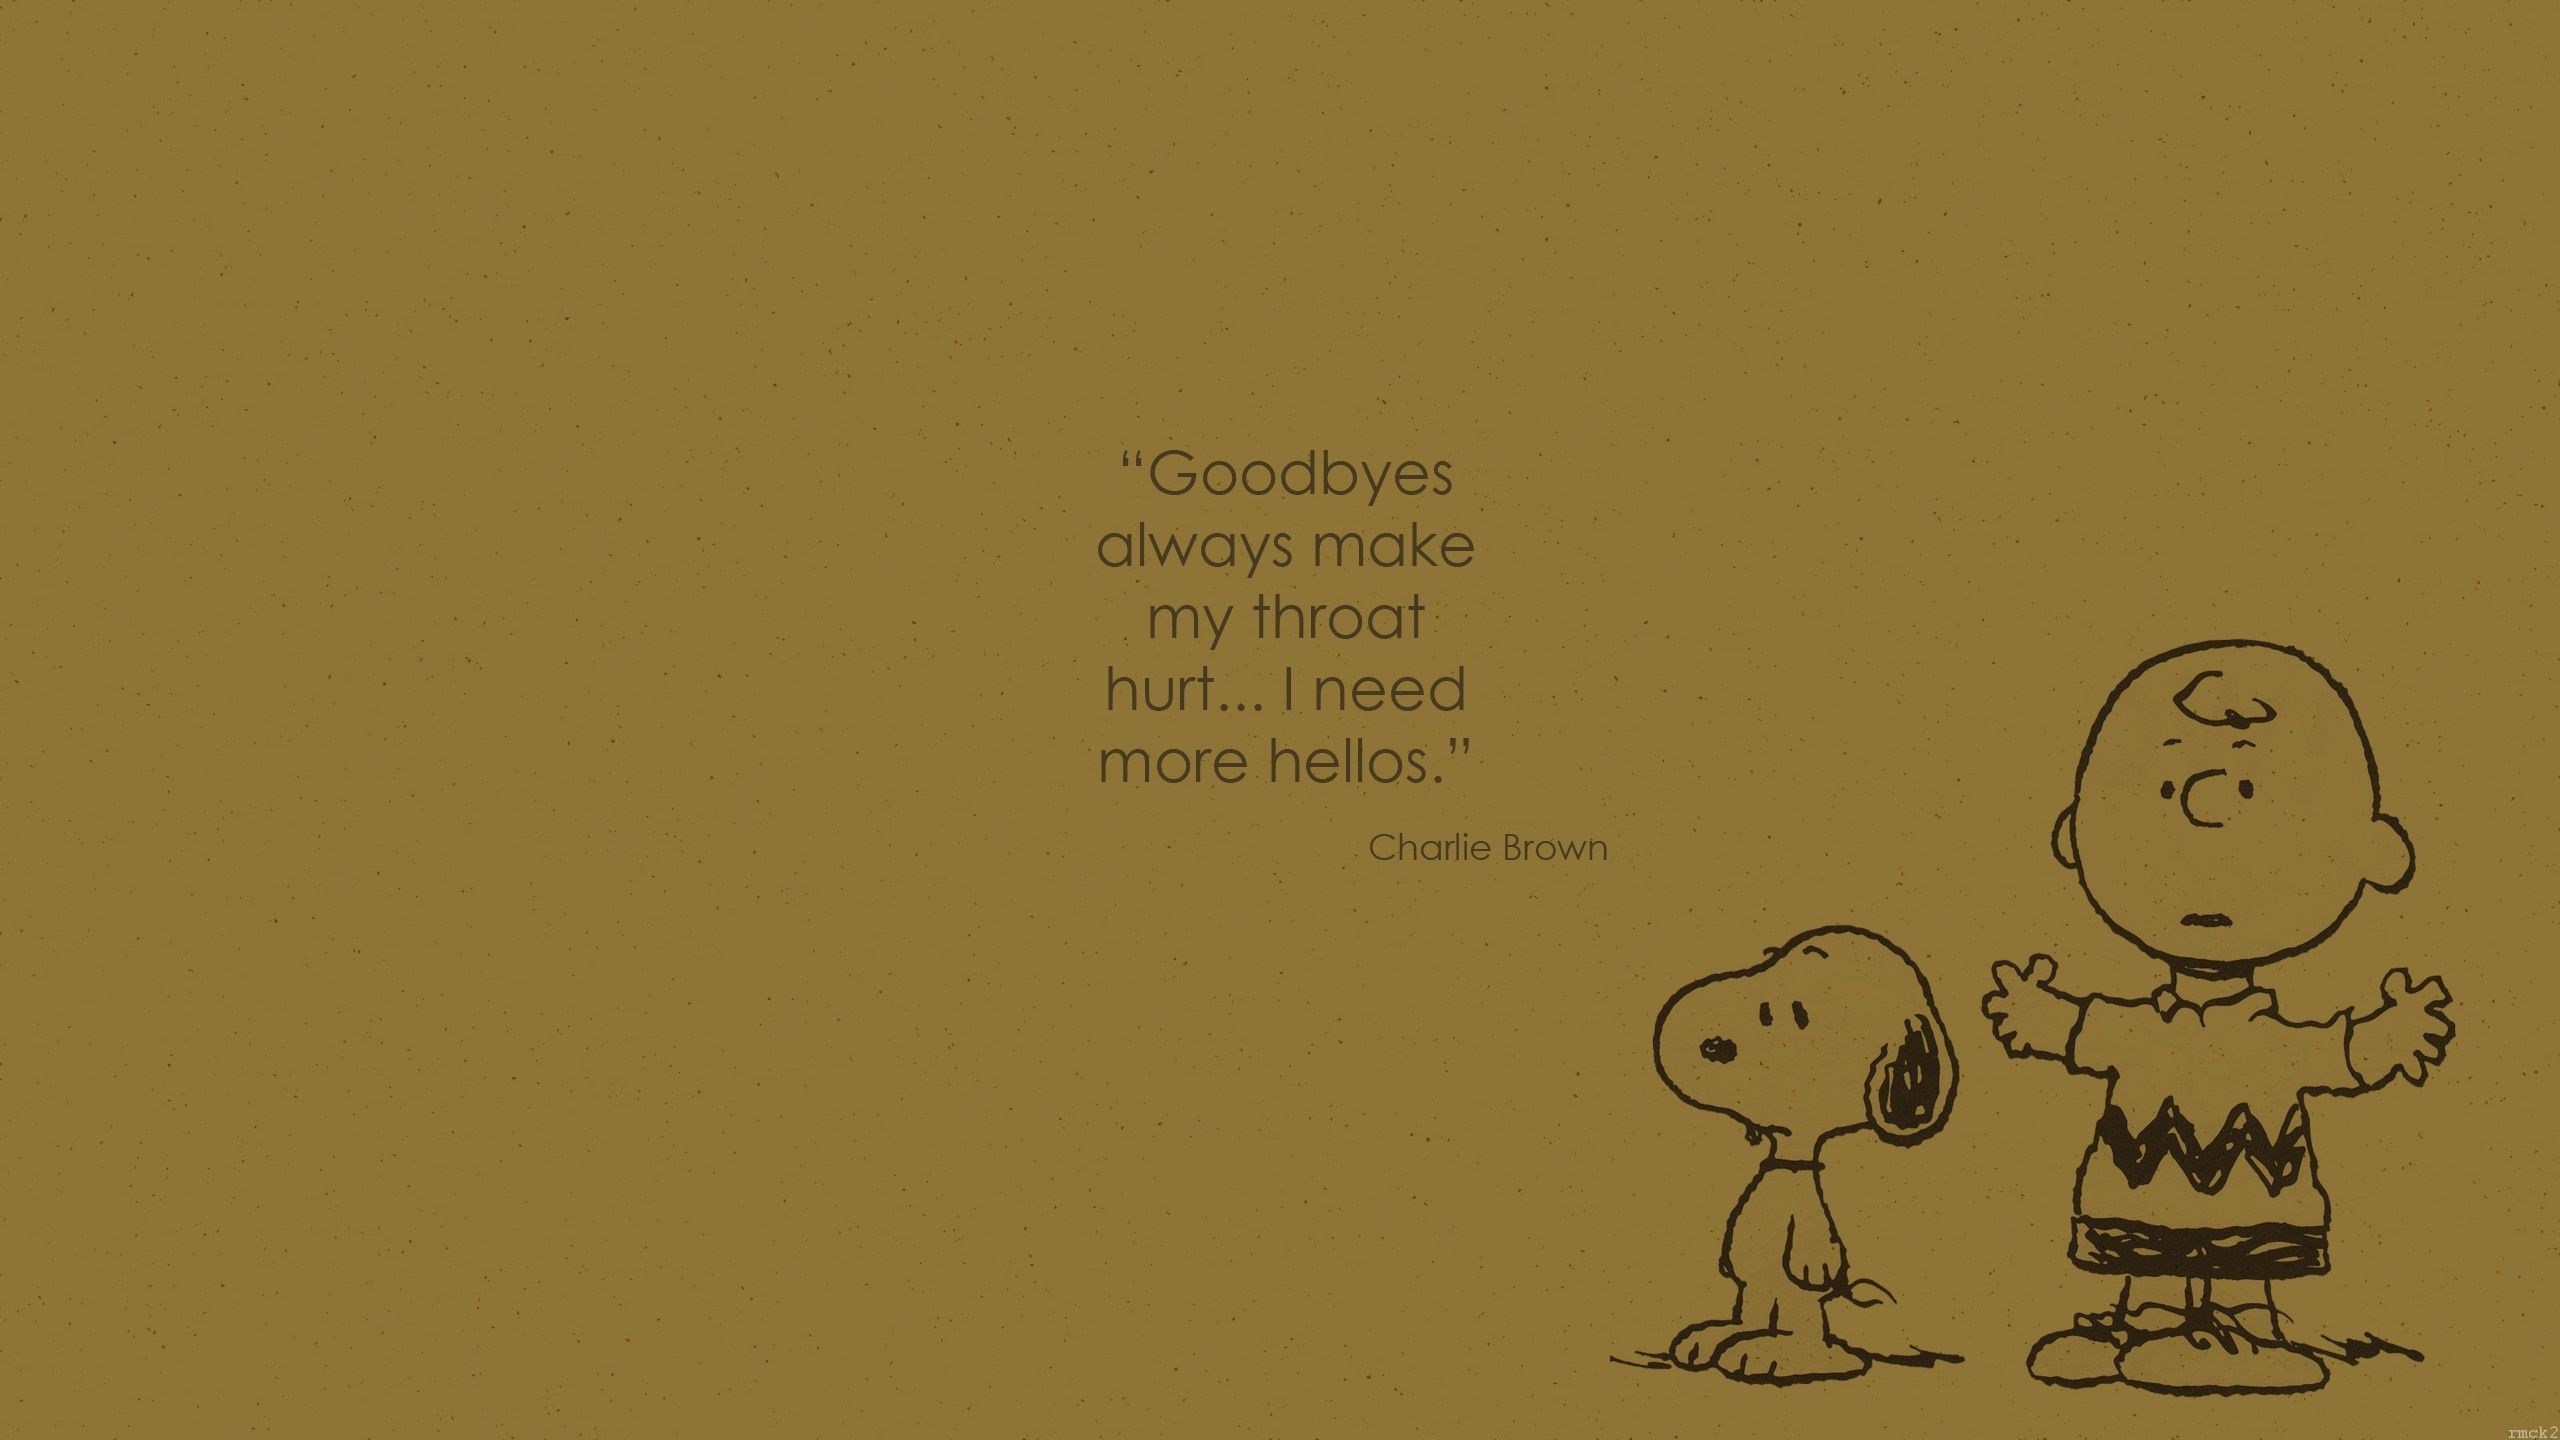 Charlie Brown peanuts quote wallpaper with a brown background - Charlie Brown, Snoopy